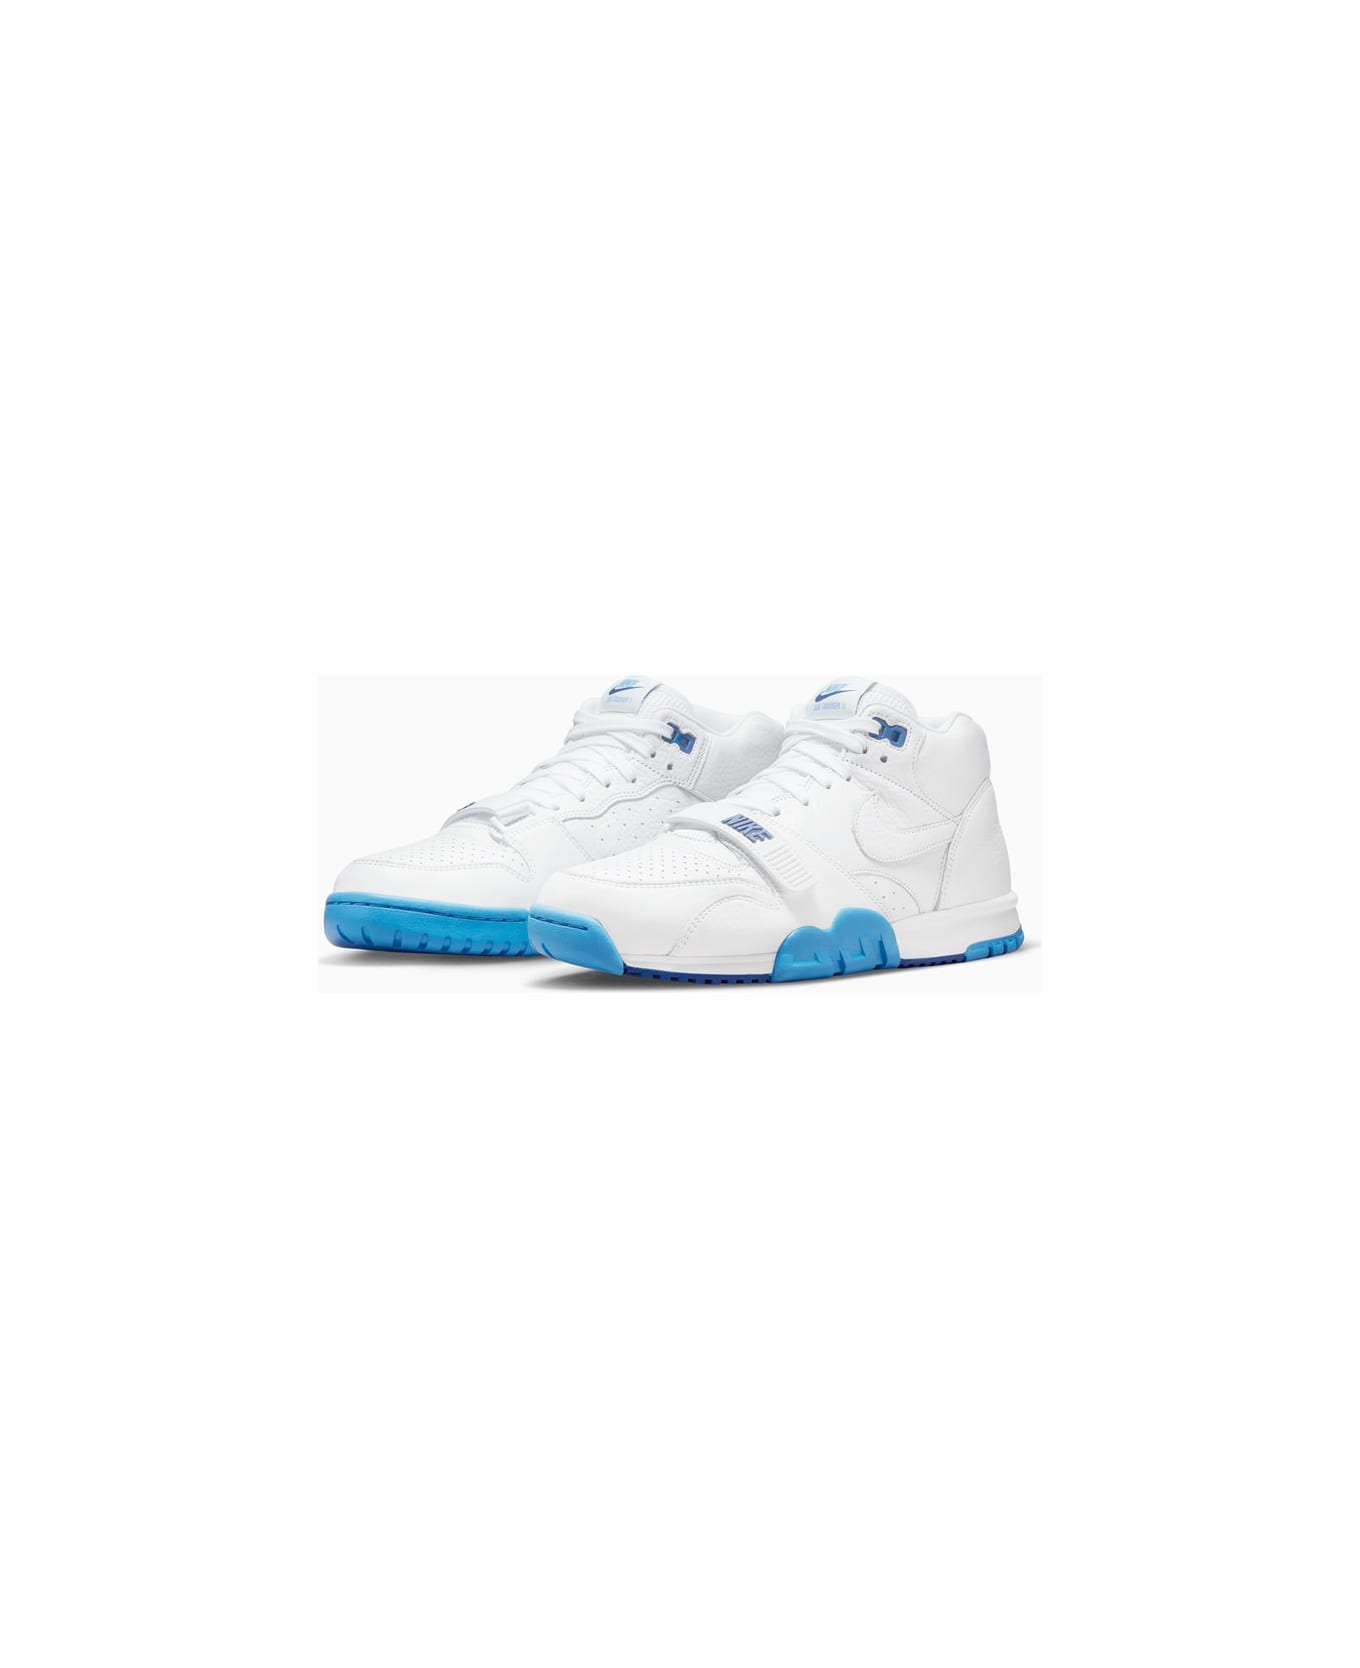 Nike Air Trainer 1 Sneakers Dr9997-100 - White